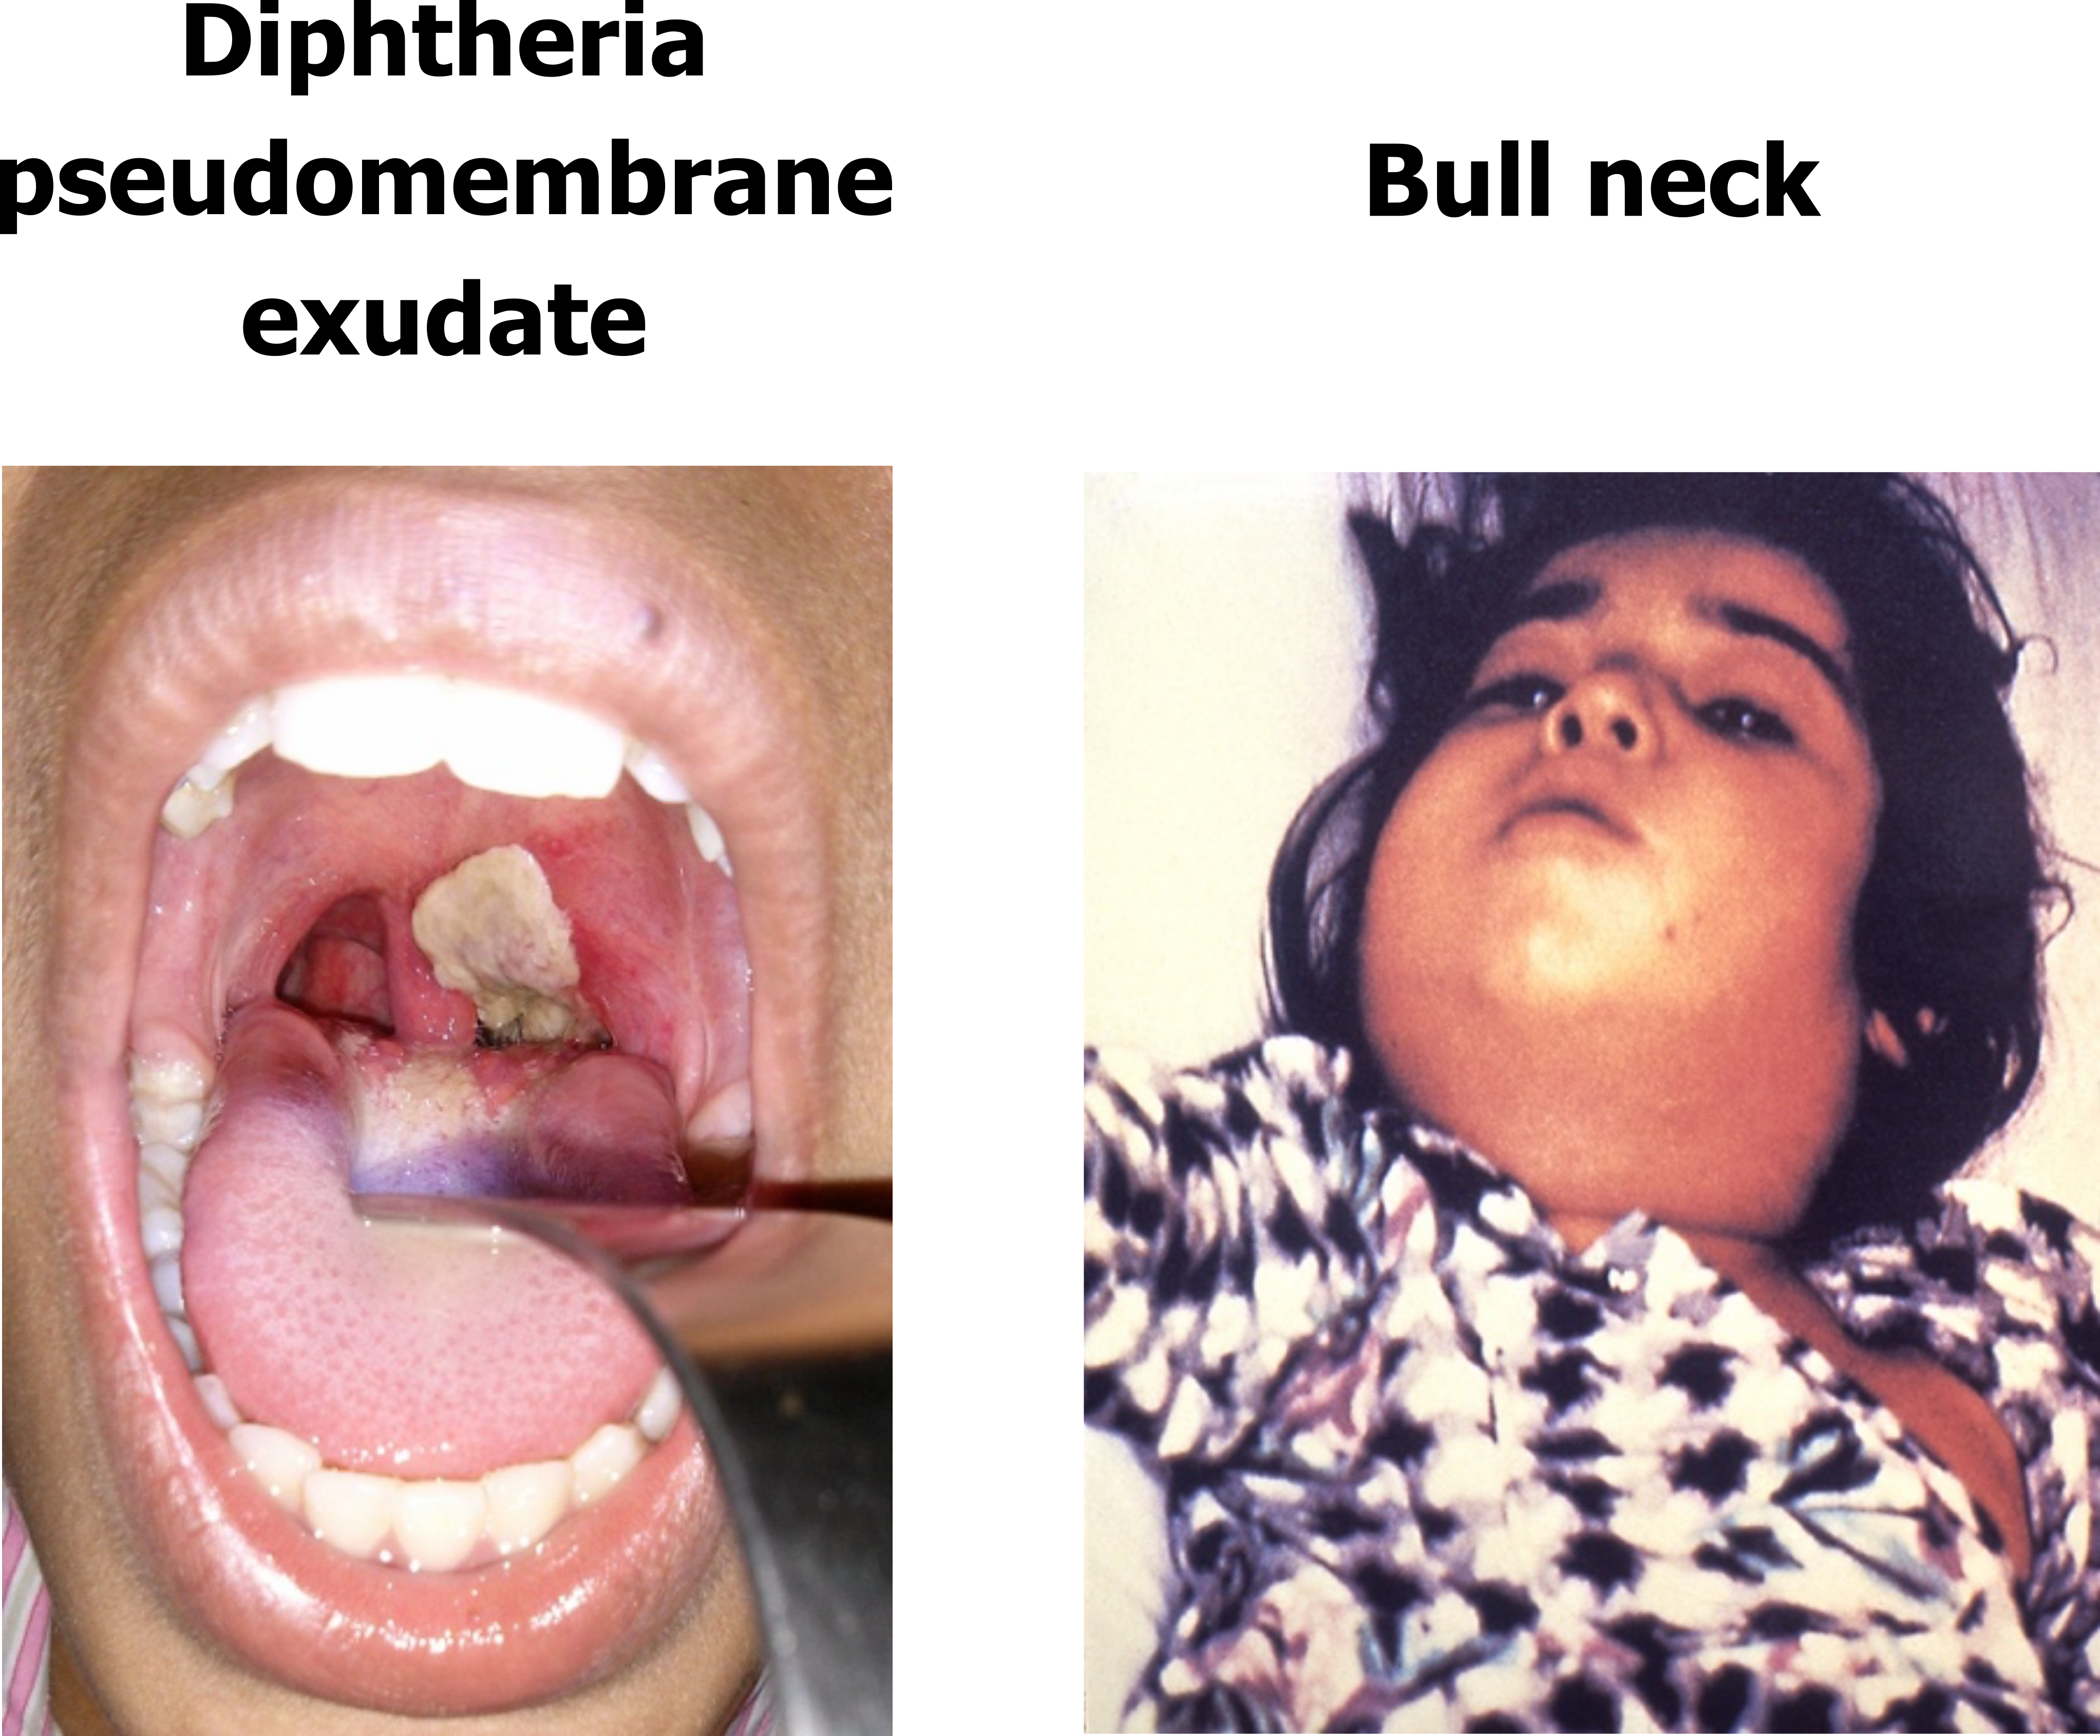 Two images show pathological indications of C. Diphtheriae. The first on the left is a photo of an open mouth with a depressor pushing the tongue down to reveal thick exudate covering the uvula and tonsils. The second photo on the right shows a recumbent child whose neck is severely engorged.